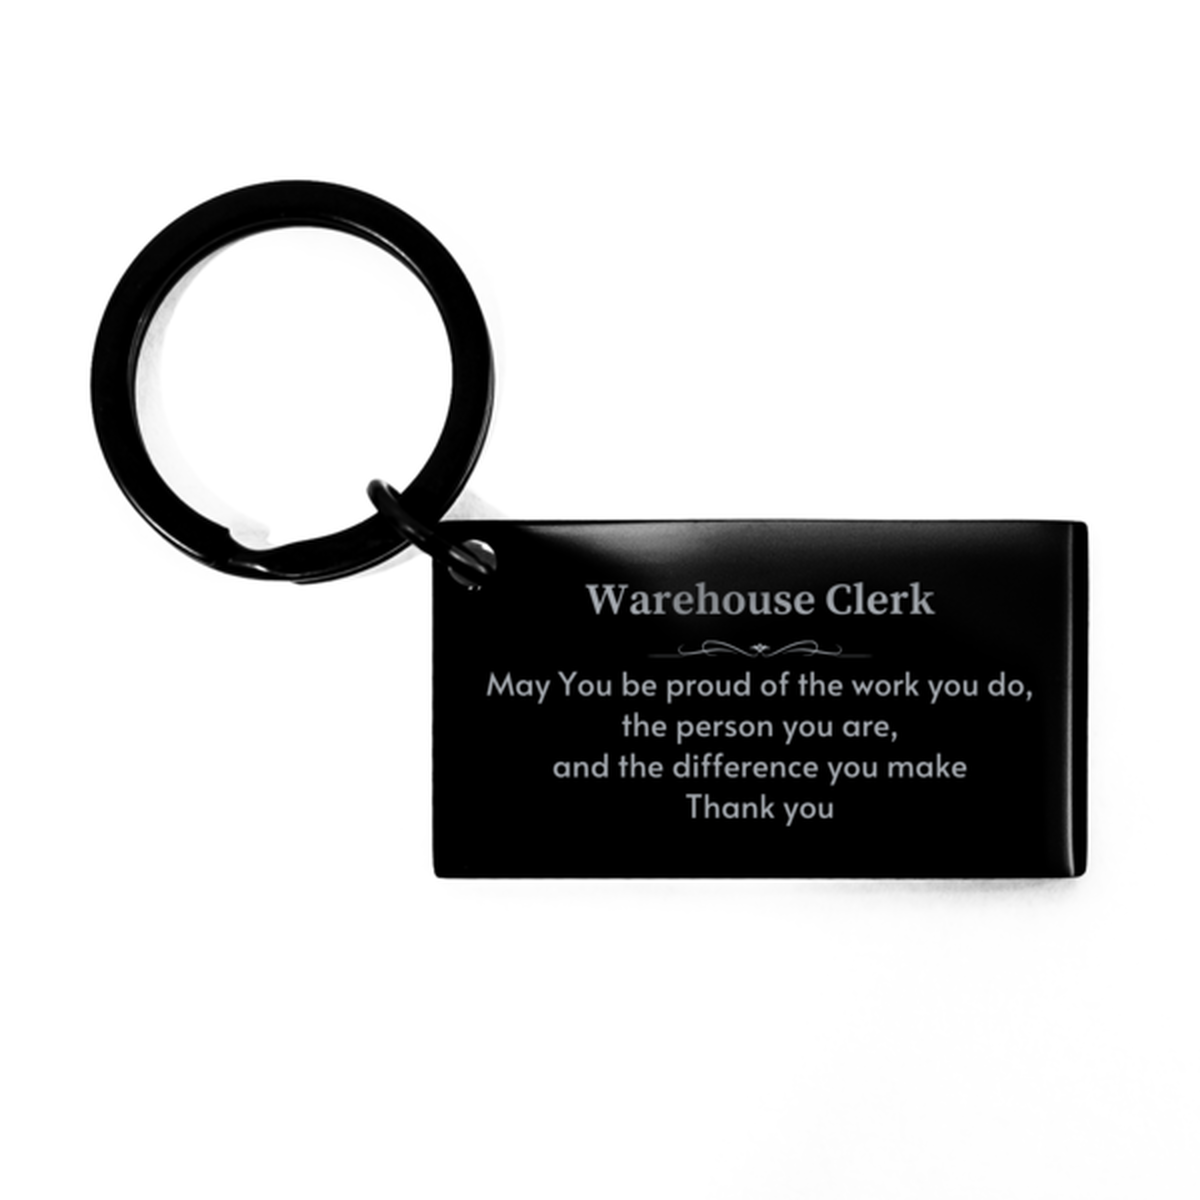 Heartwarming Keychain Retirement Coworkers Gifts for Warehouse Clerk, Architect May You be proud of the work you do, the person you are Gifts for Boss Men Women Friends